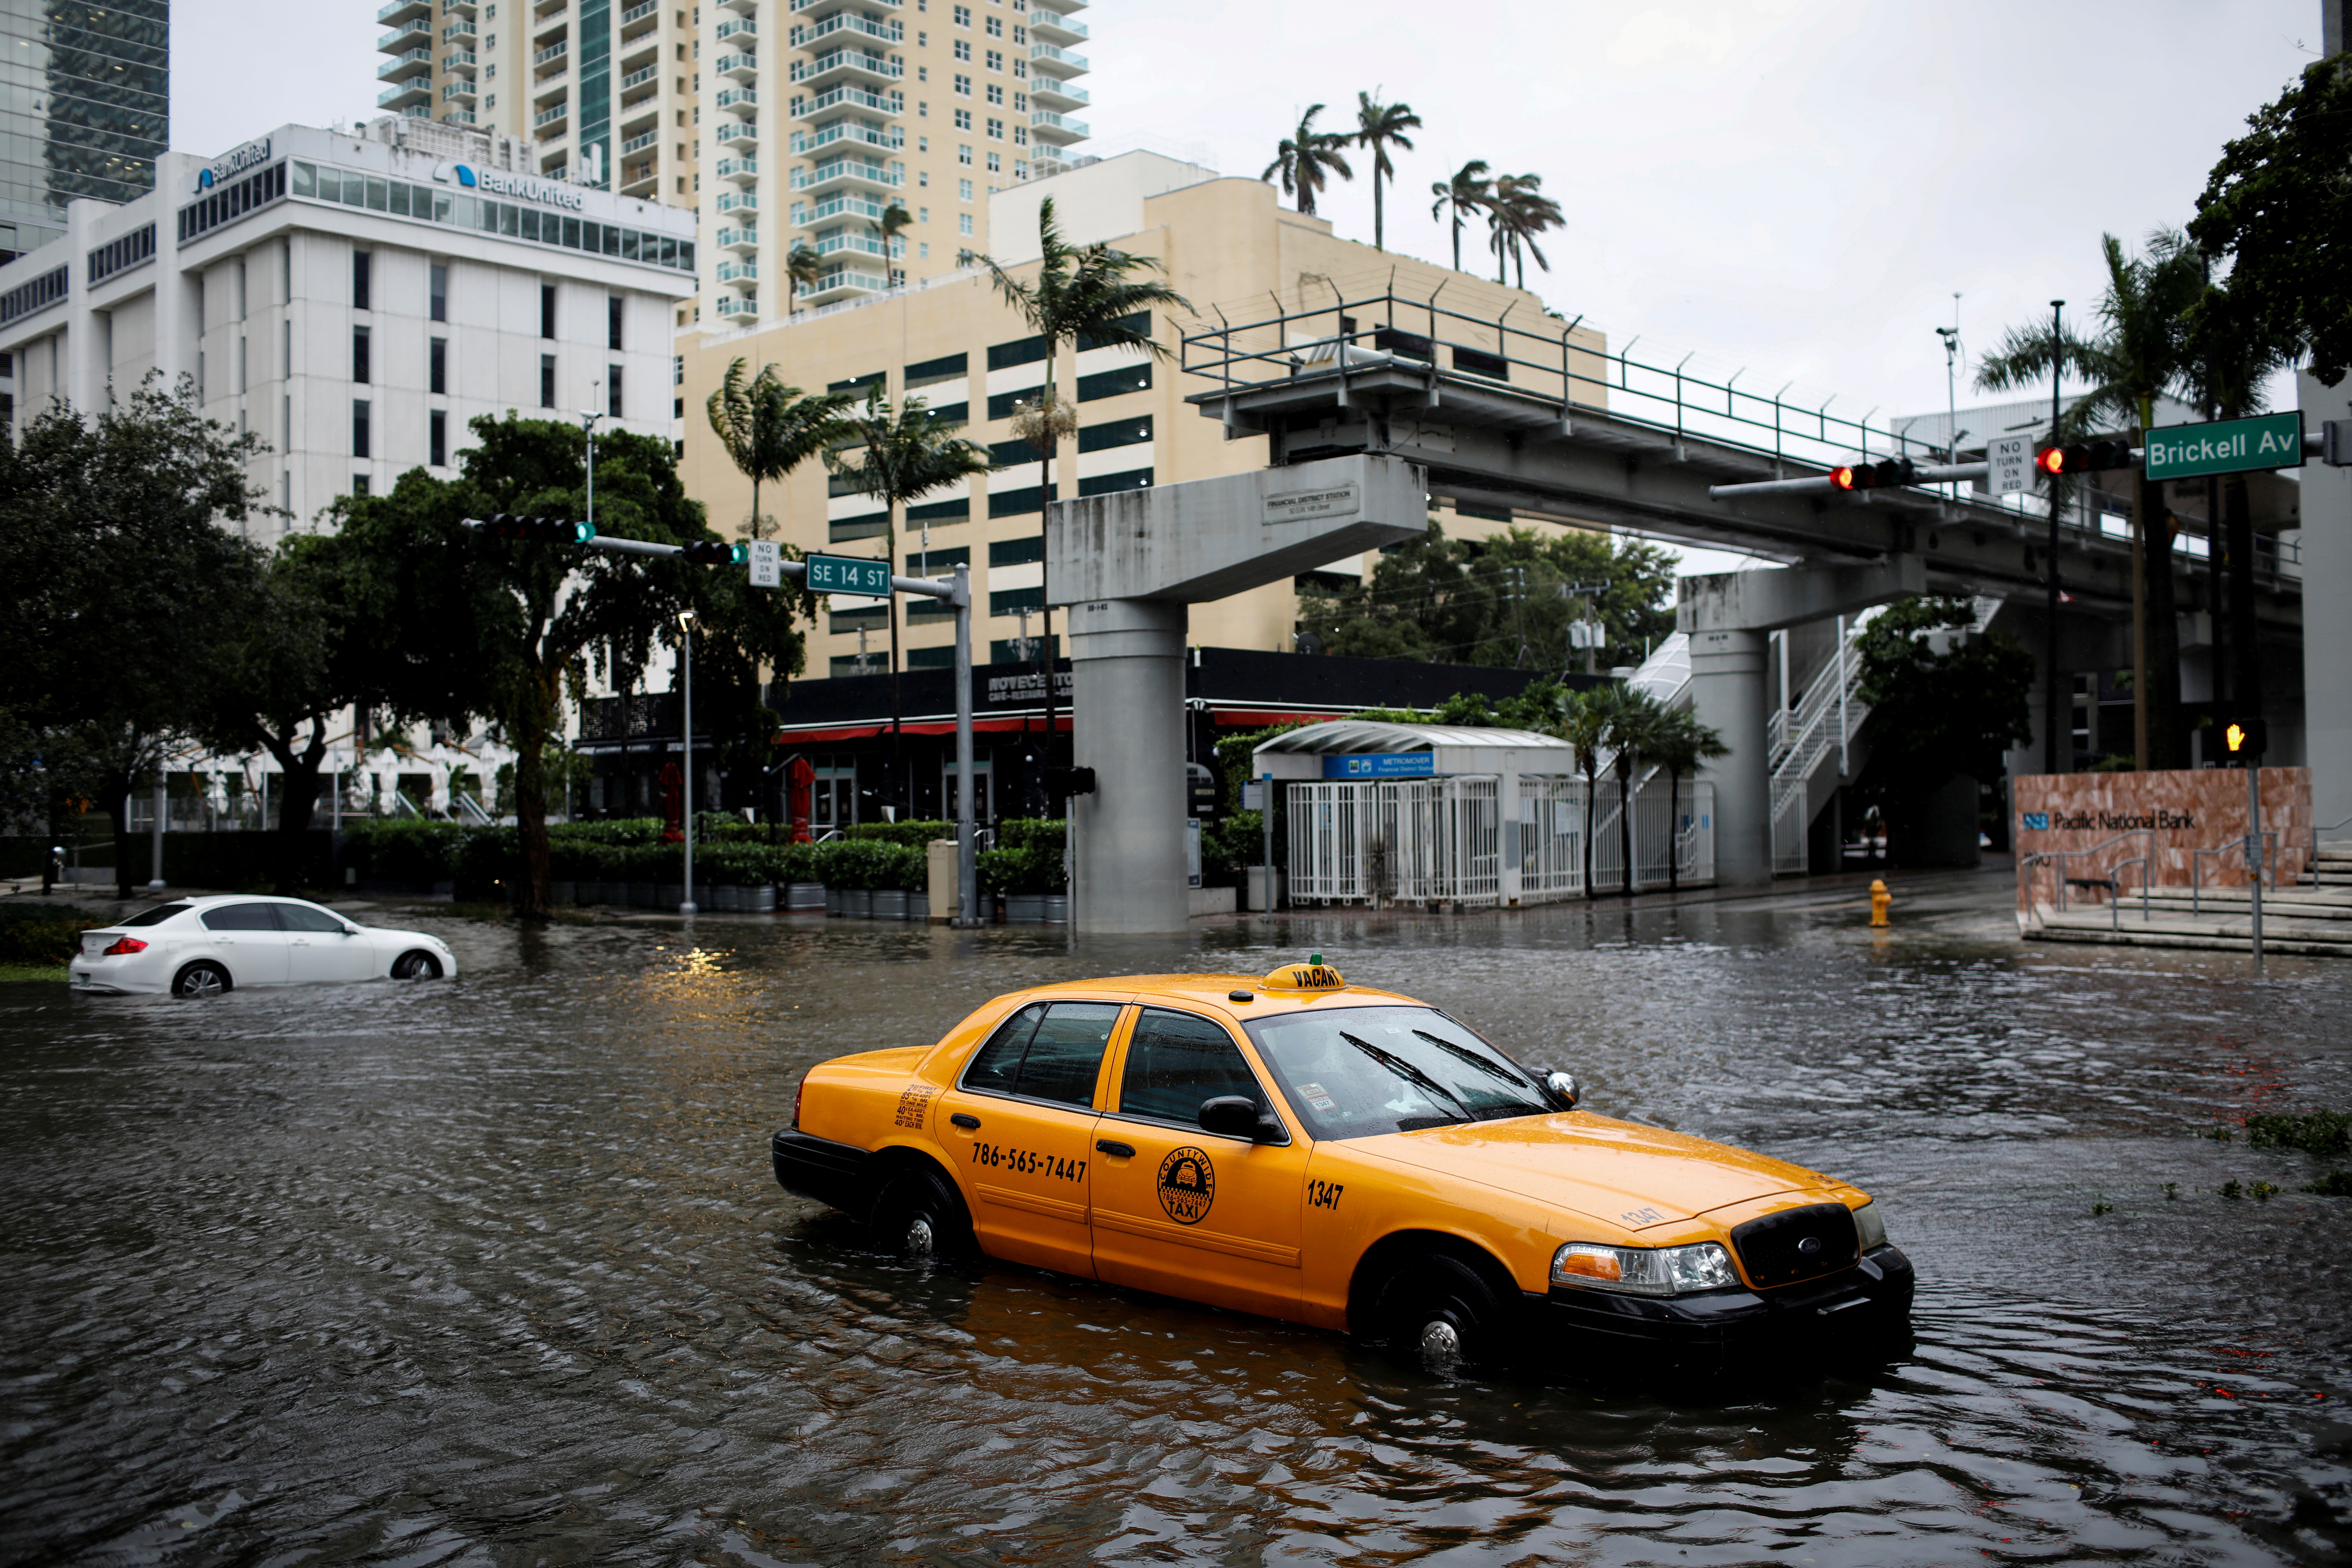 A damaged taxi is seen in floodwaters caused by Tropical Storm Eta in a street at the Brickell neighborhood in Miami, Florida, U.S., November 9, 2020. REUTERS/Marco Bello